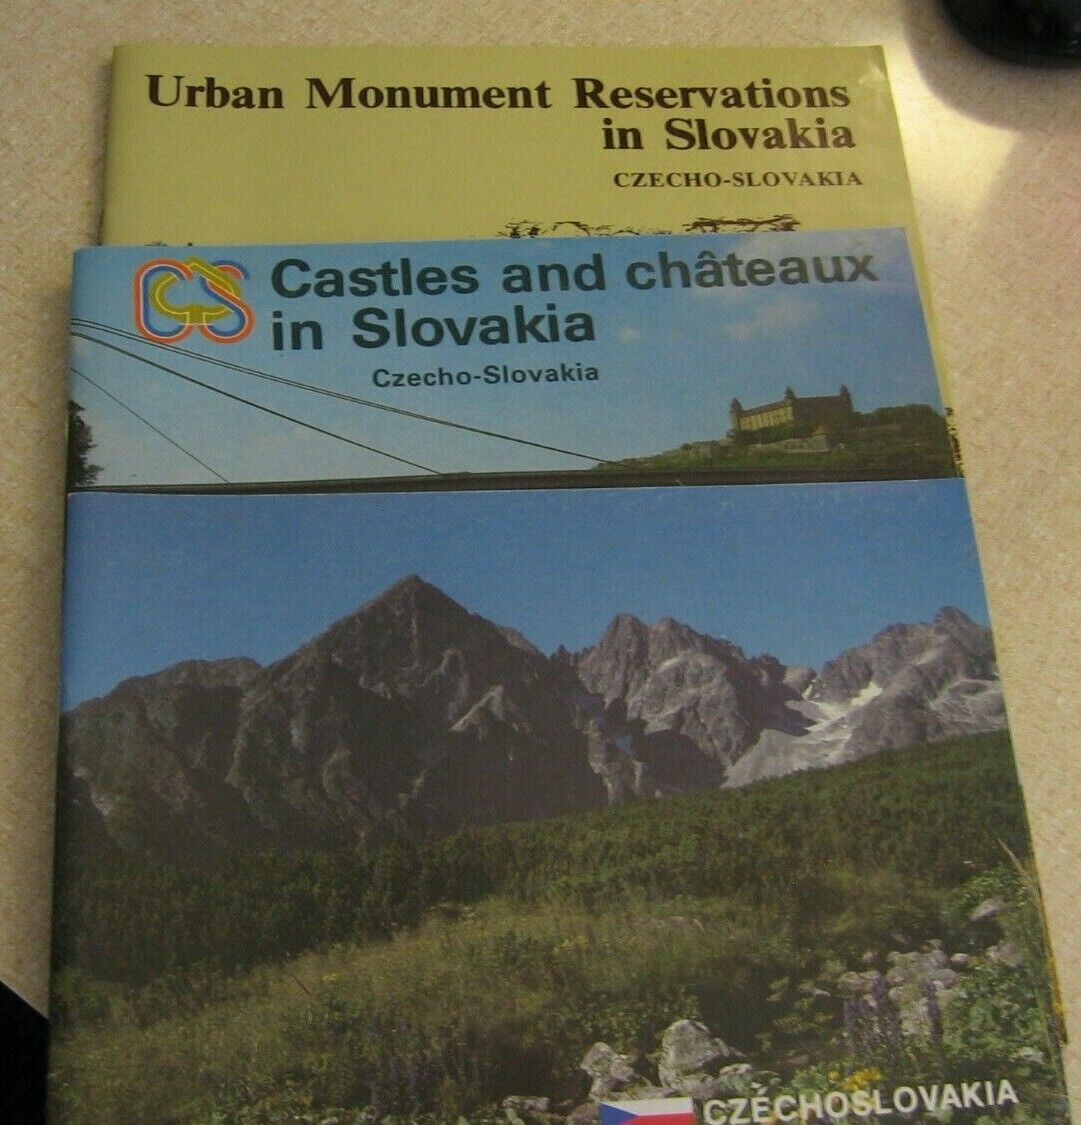 Czechoslovakia Slovakia Mountains Castles Chateaux Architecture Lot of 3 Booklet